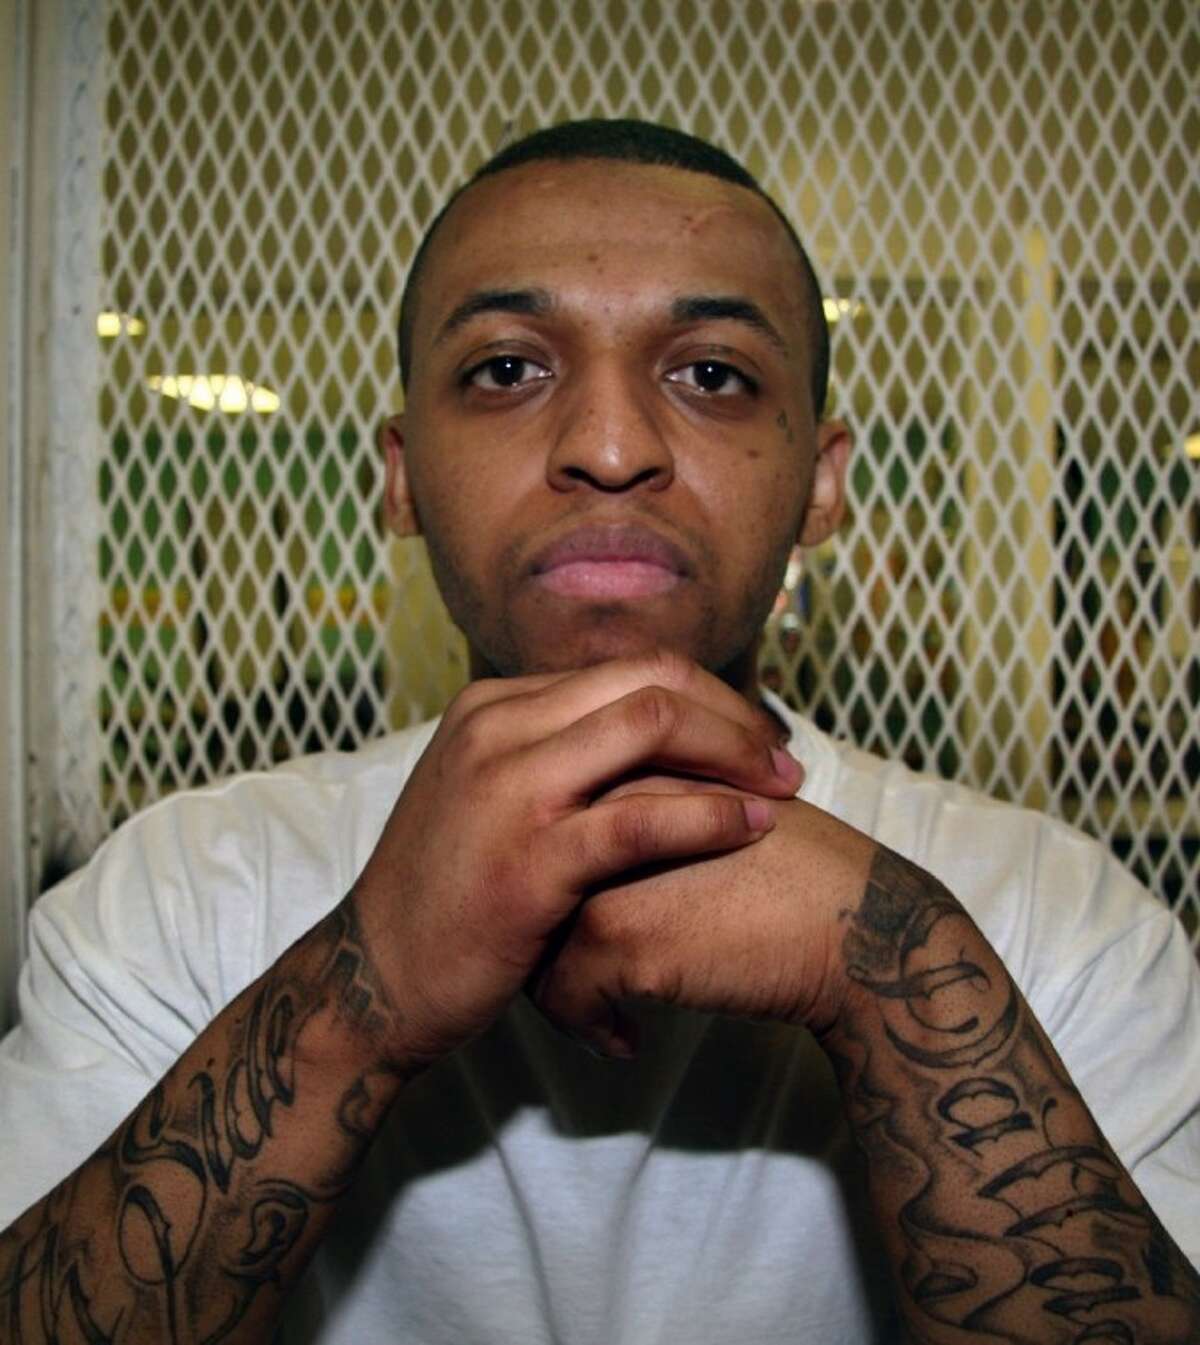 In this Dec. 5, 2012, photo, Texas death row inmate Steven Lawayne Nelson poses for a photo in a visiting cage at the Texas Department of Criminal Justice Polunsky Unit outside Livingston, Texas. Nelson, 25, was convicted of capital murder in mid-October and sent to death row for the 2011 slaying of an Arlington pastor during a robbery.